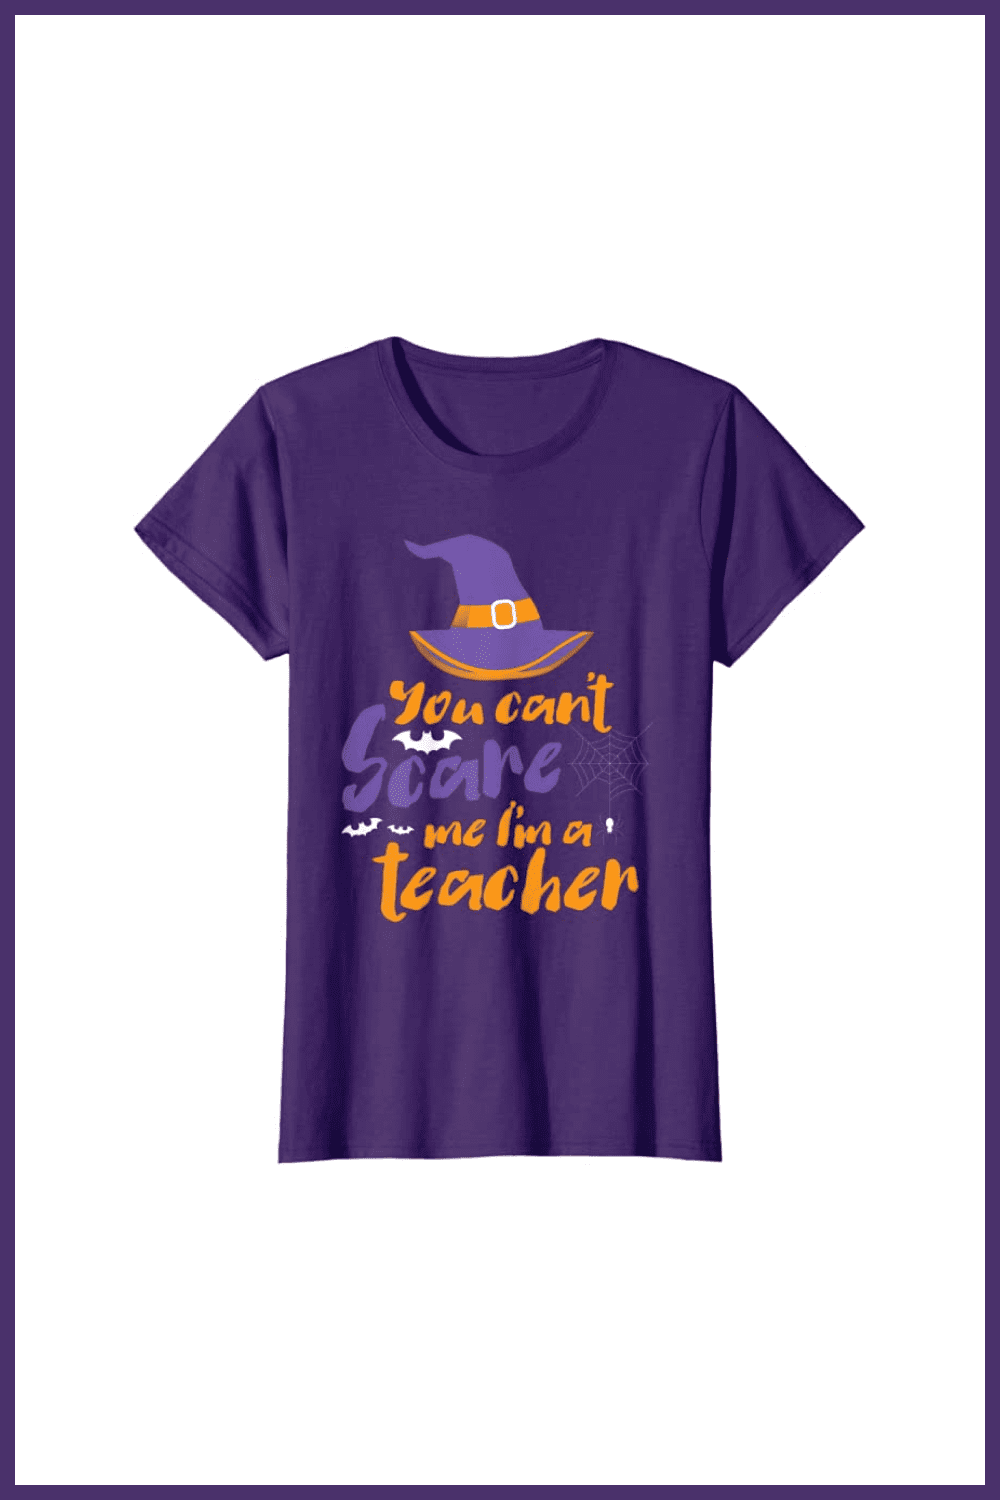 Purple t-shirt with witch hat and slogan.